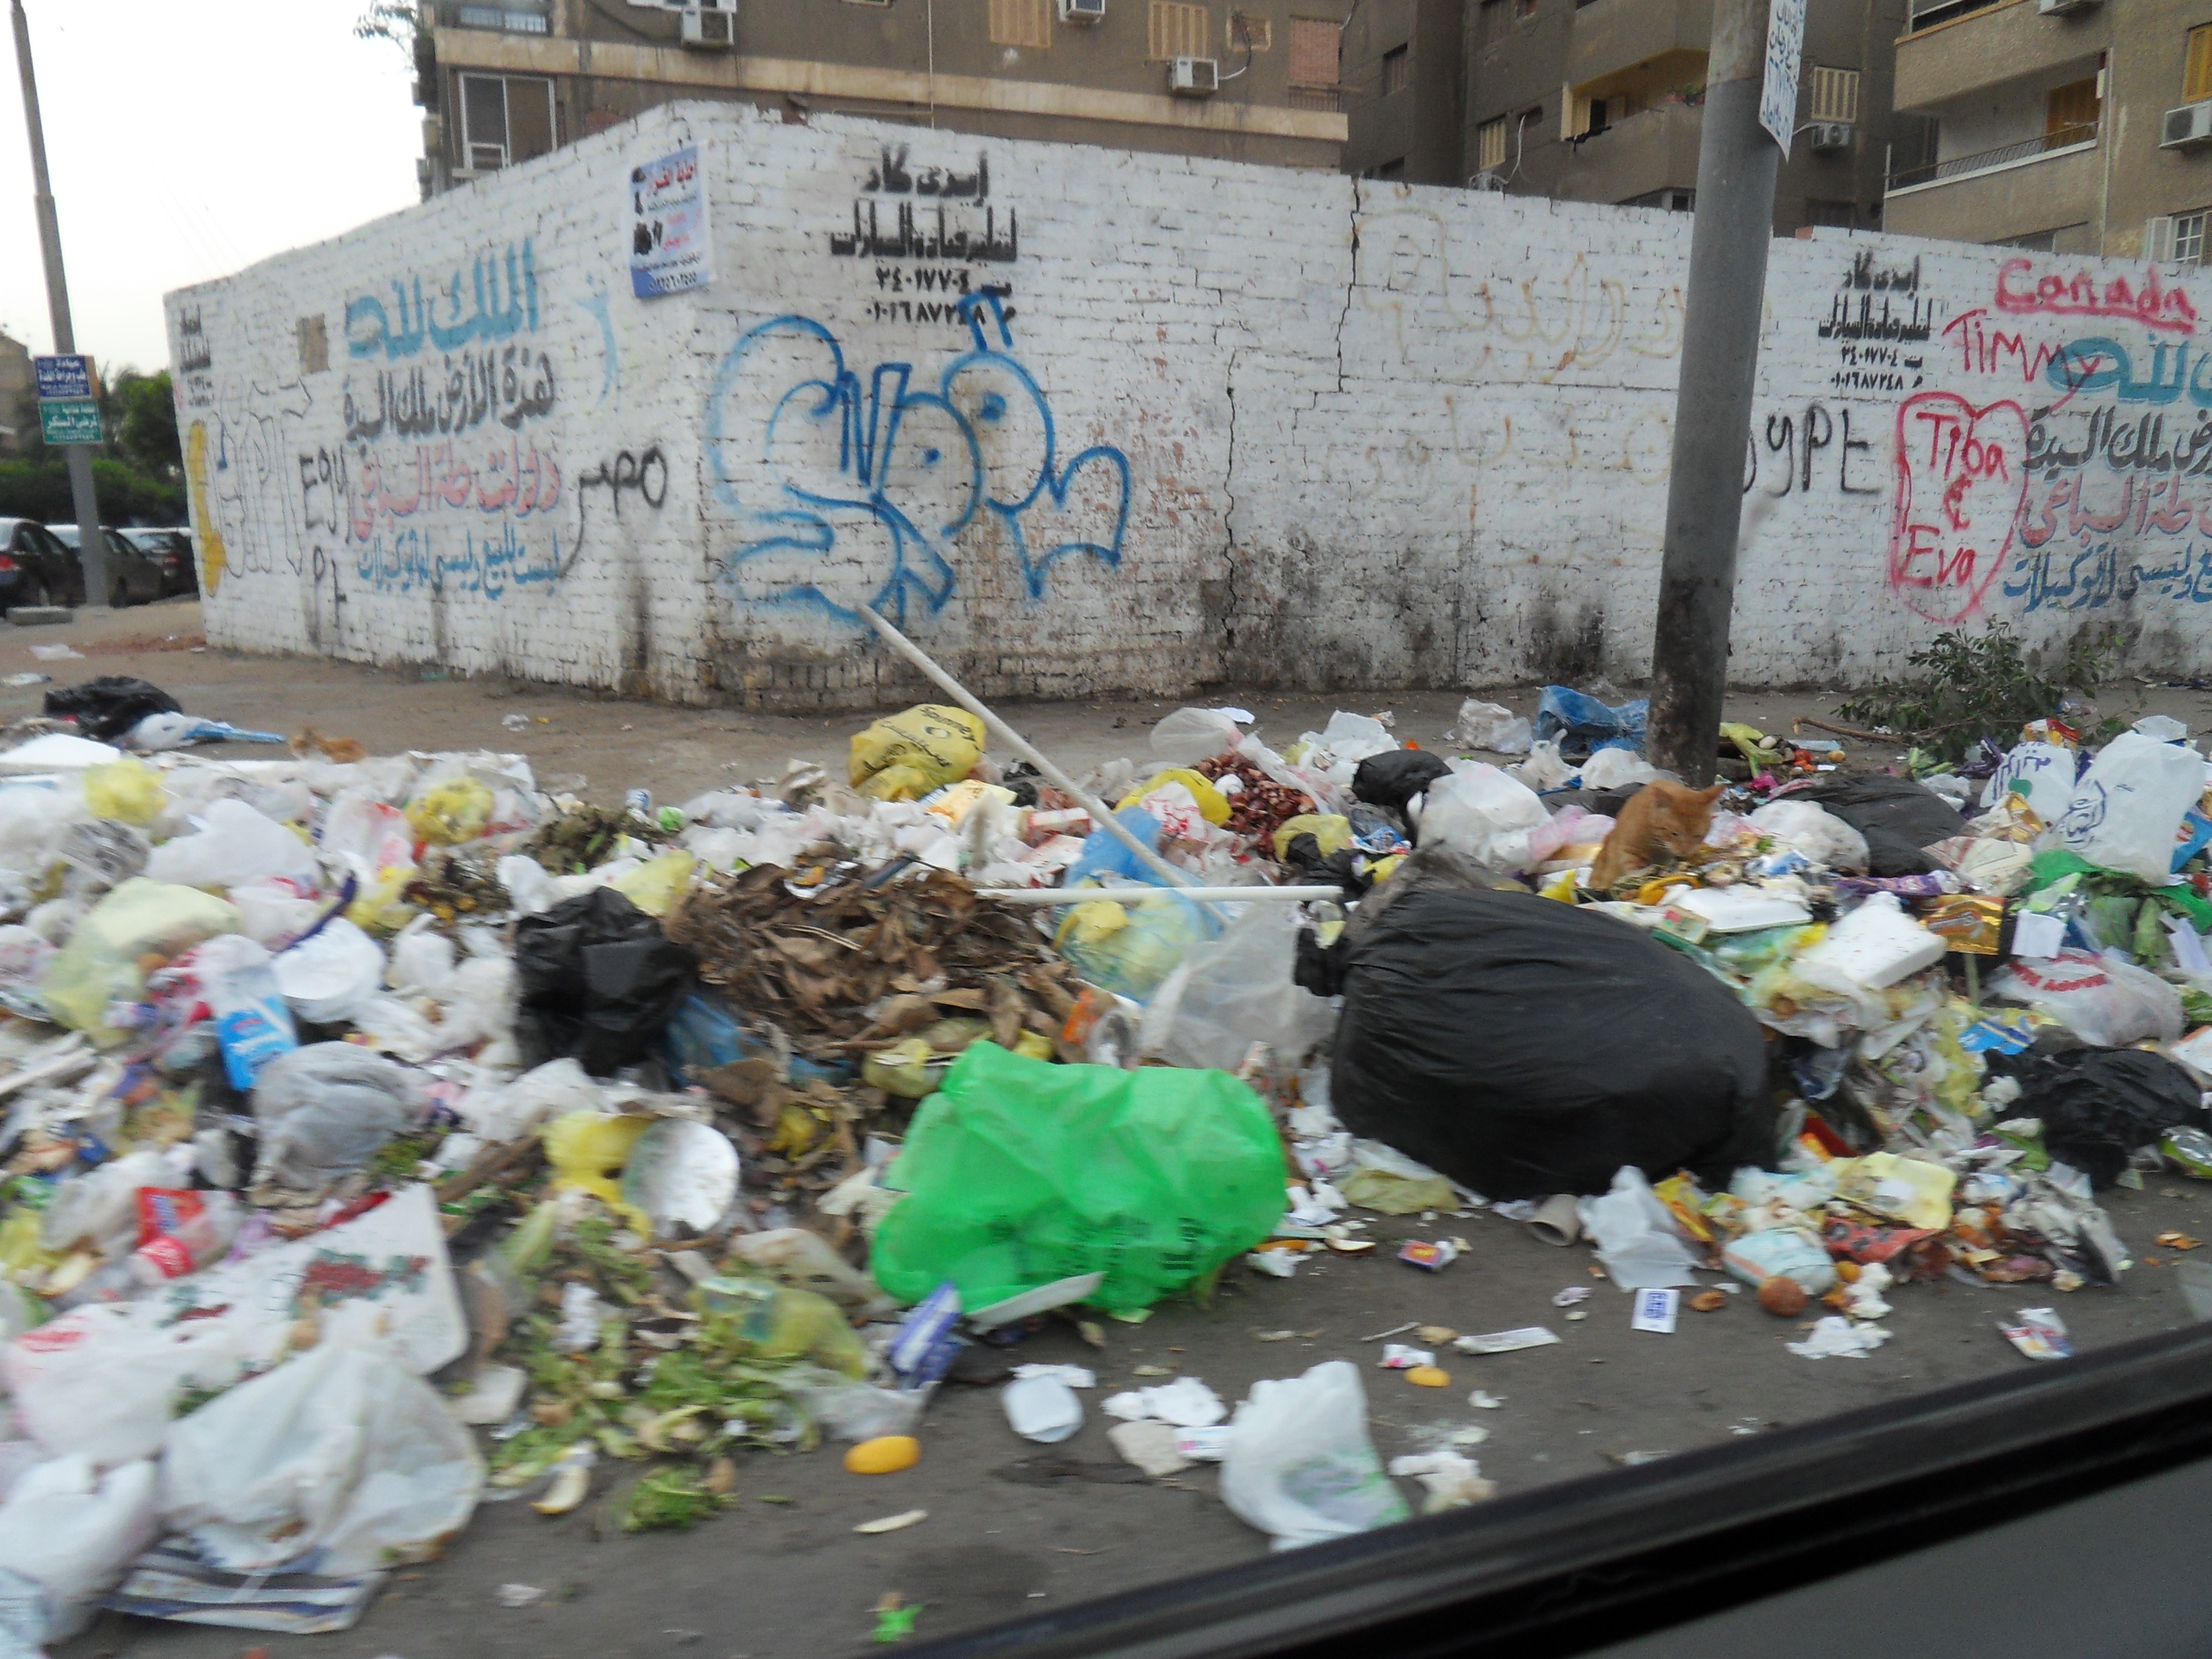 Welcome to Cairo. The City of a thousand garbage piles.